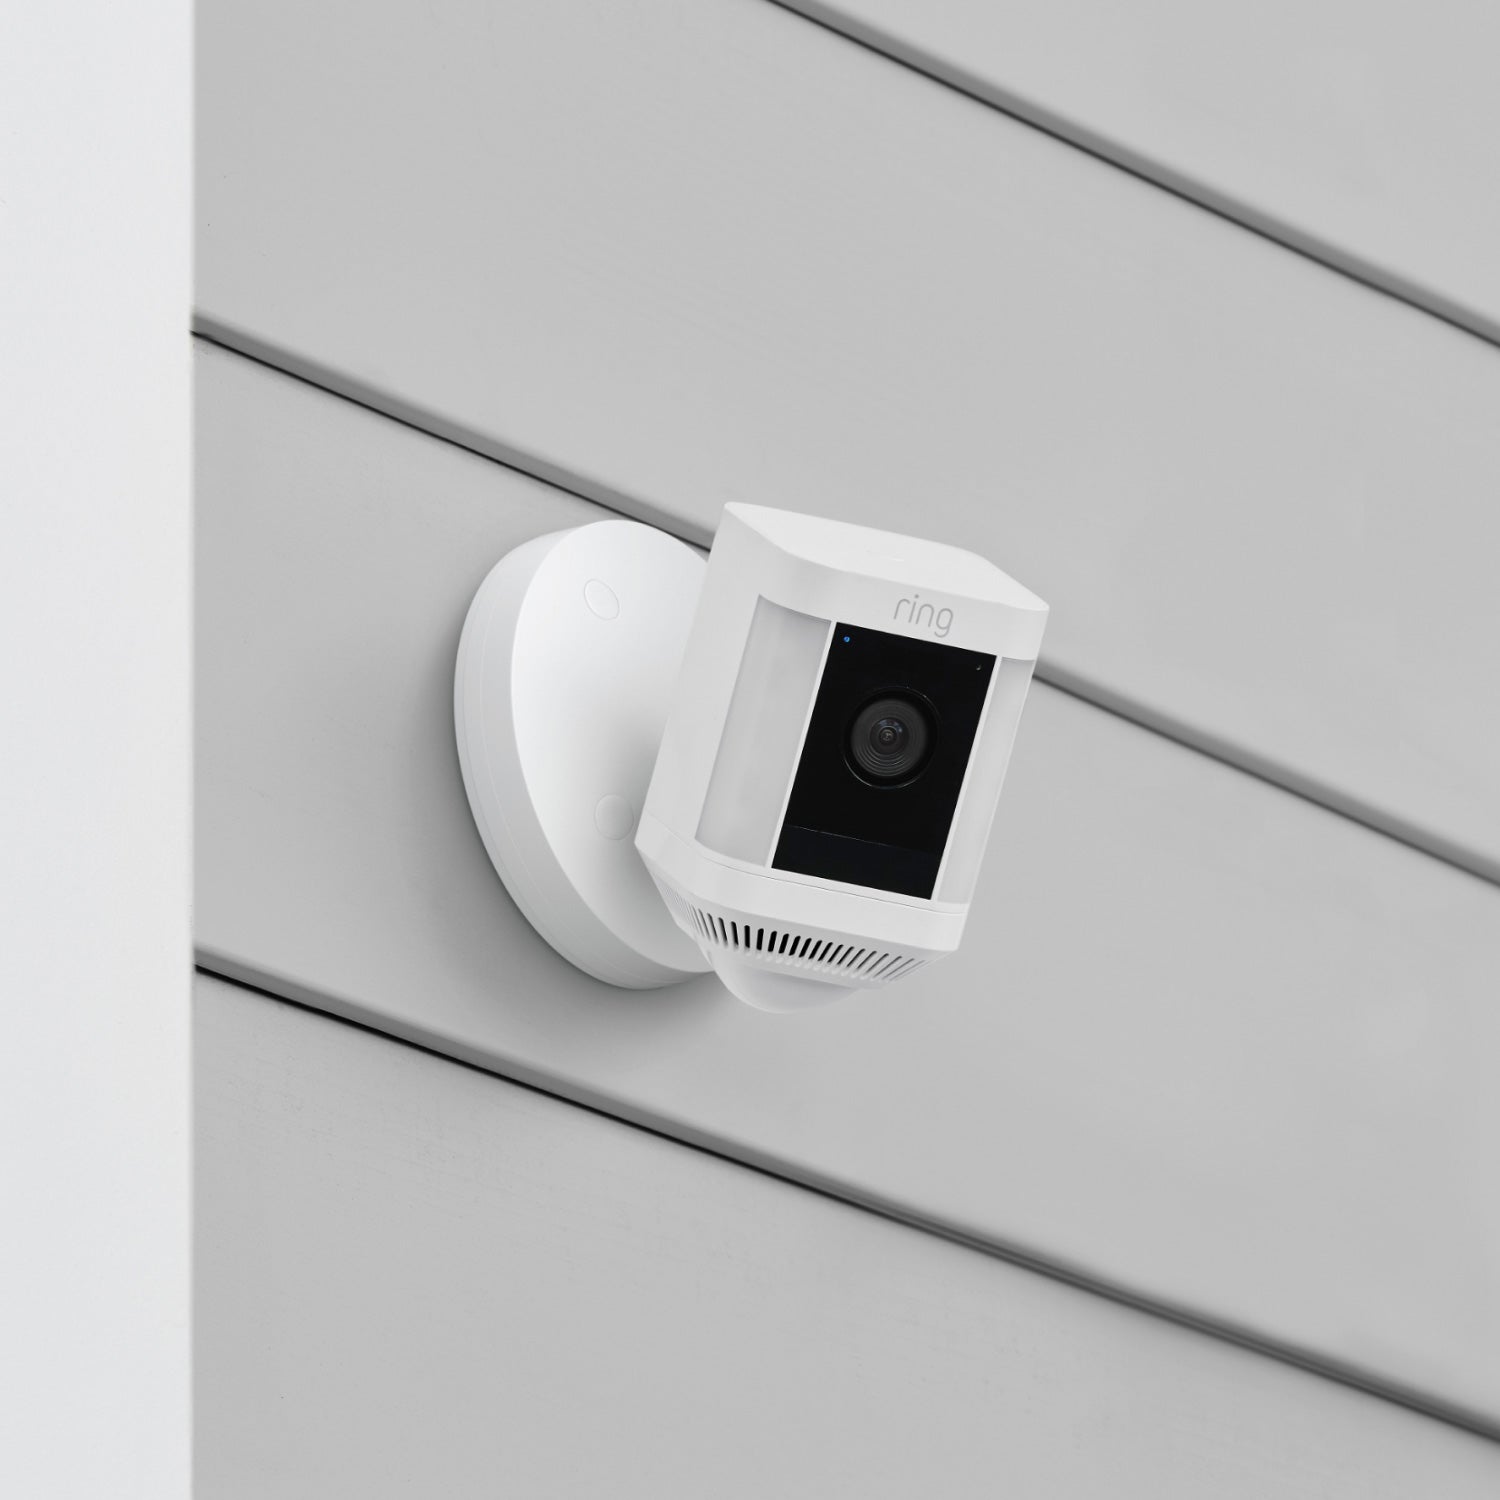 2-Pack Spotlight Cam Plus (Wired) - Spotlight Cam Plus, Wired model in white, mounted on exterior wall of home.